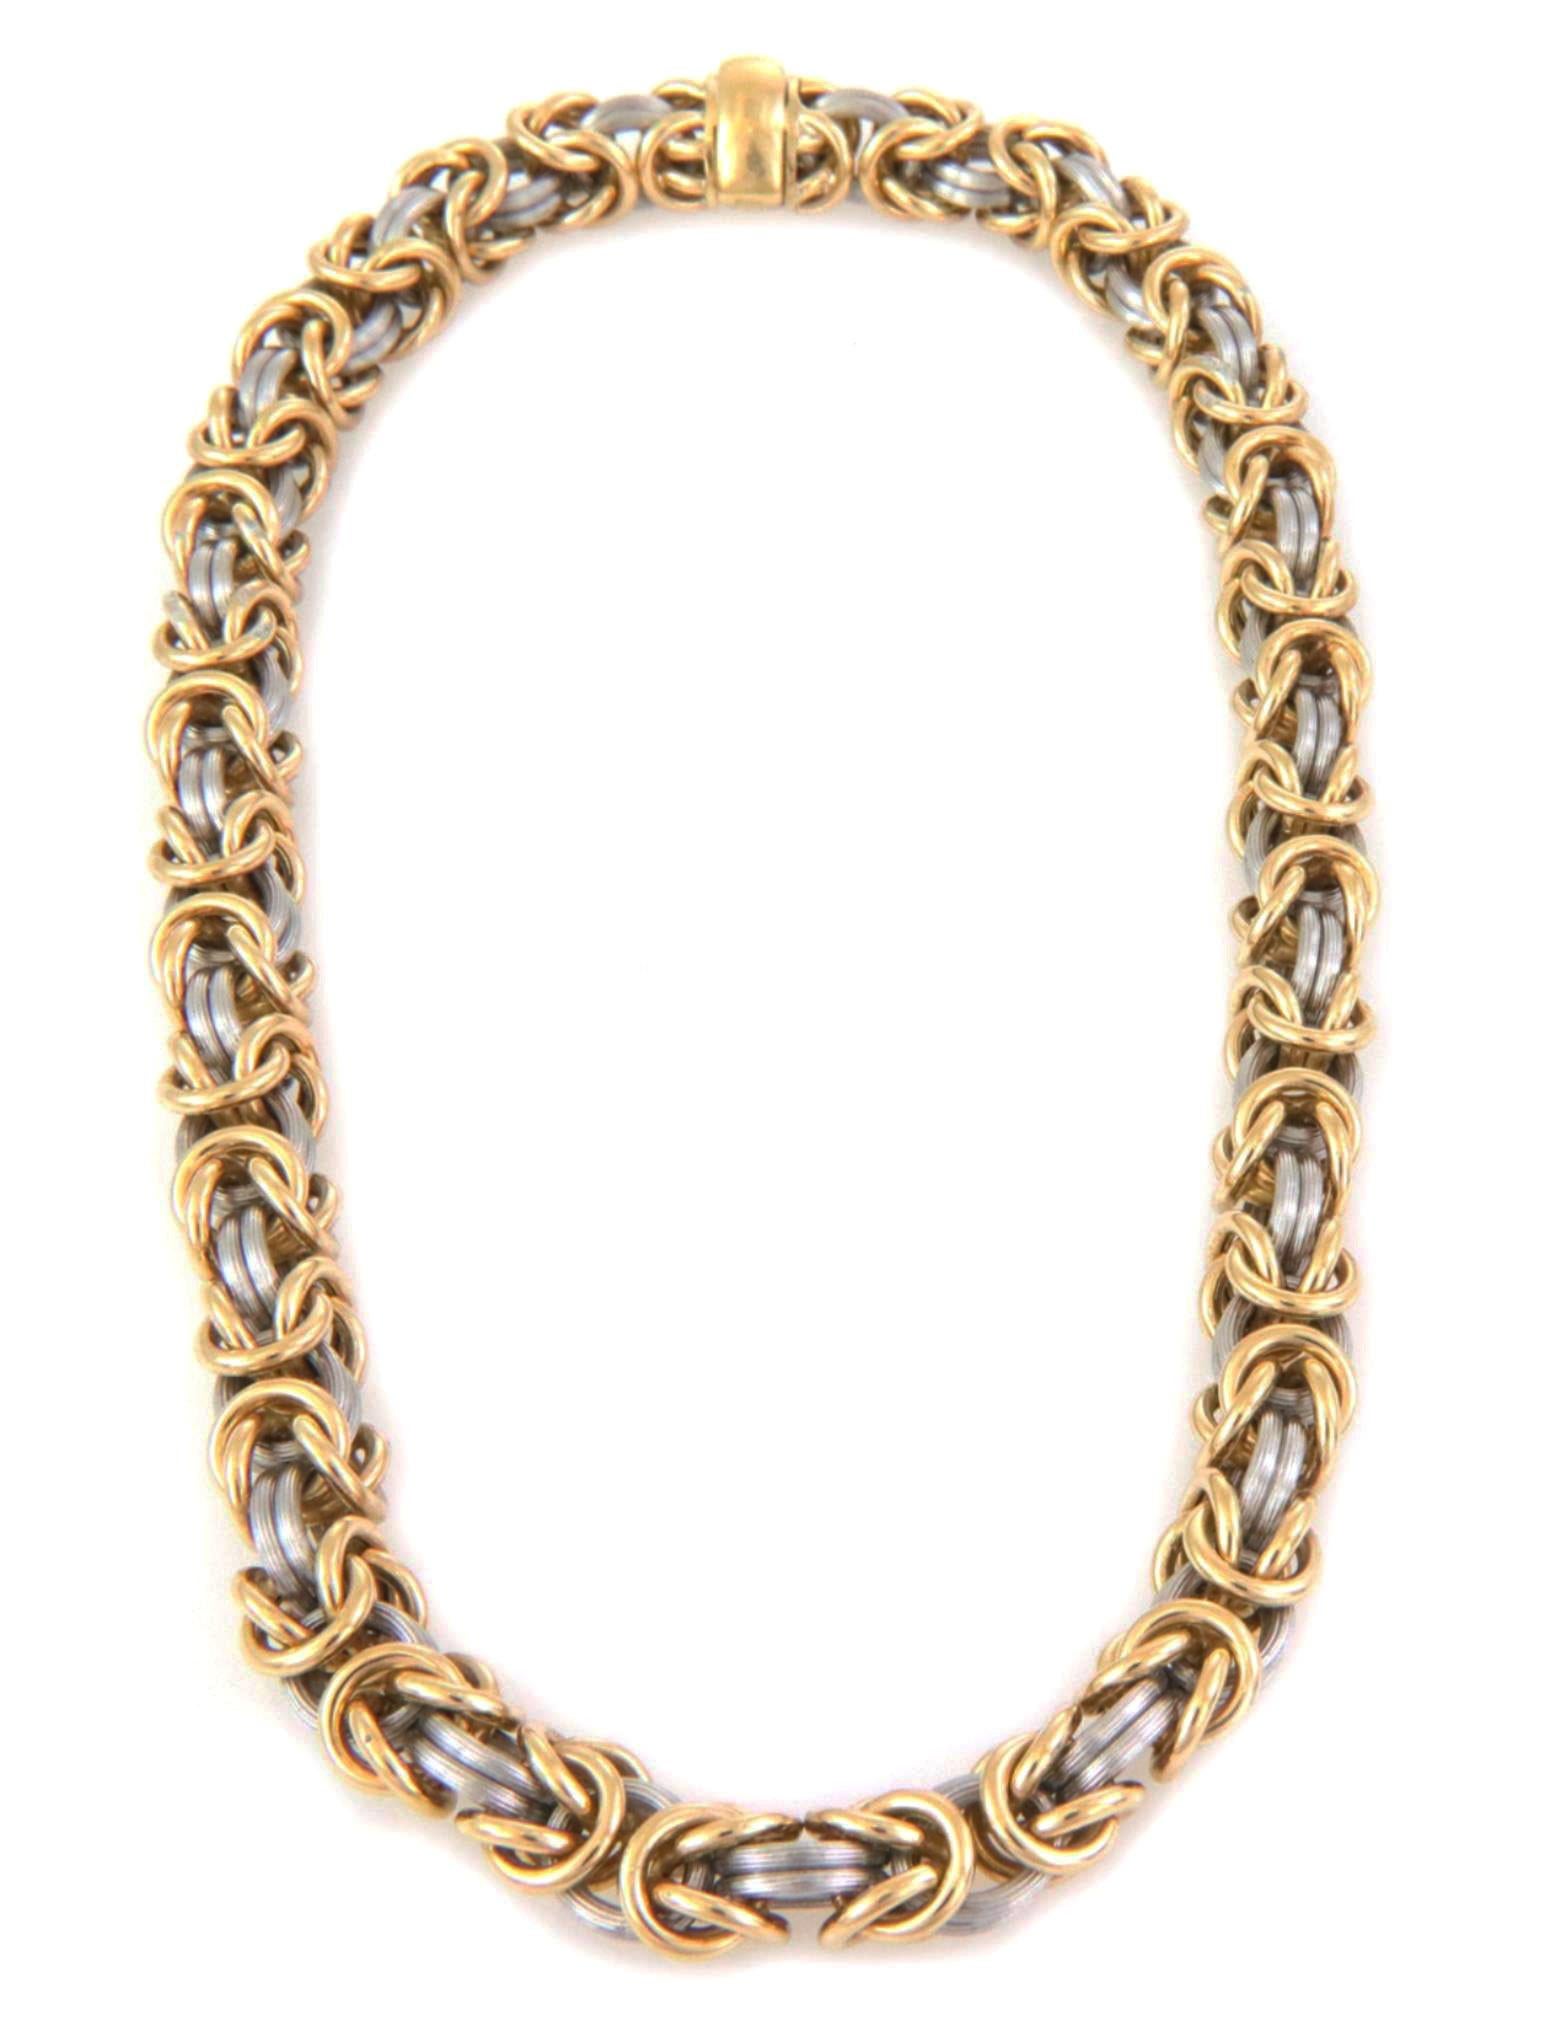 This is a gorgeous fashionable necklace from designer ROM Germany, crafted from 18k yellow gold and platinum featuring a 9mm thick byzantine links with polished yellow gold and fine fluted platinum ring links. The necklace secure with a slide slot